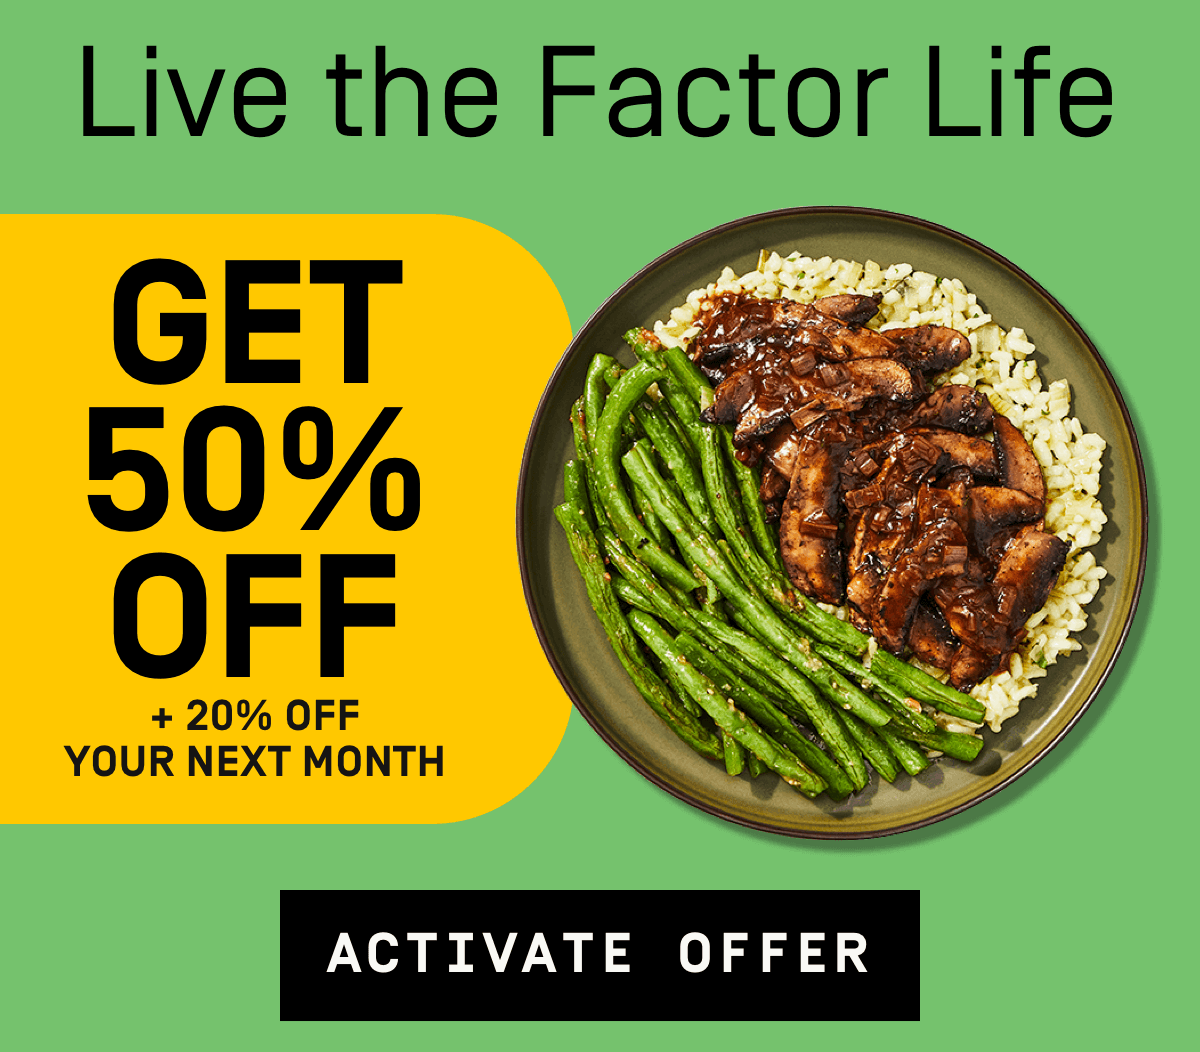 Live the Factor life! Get 50% Off + 20% Off your next month | Activate Offer 